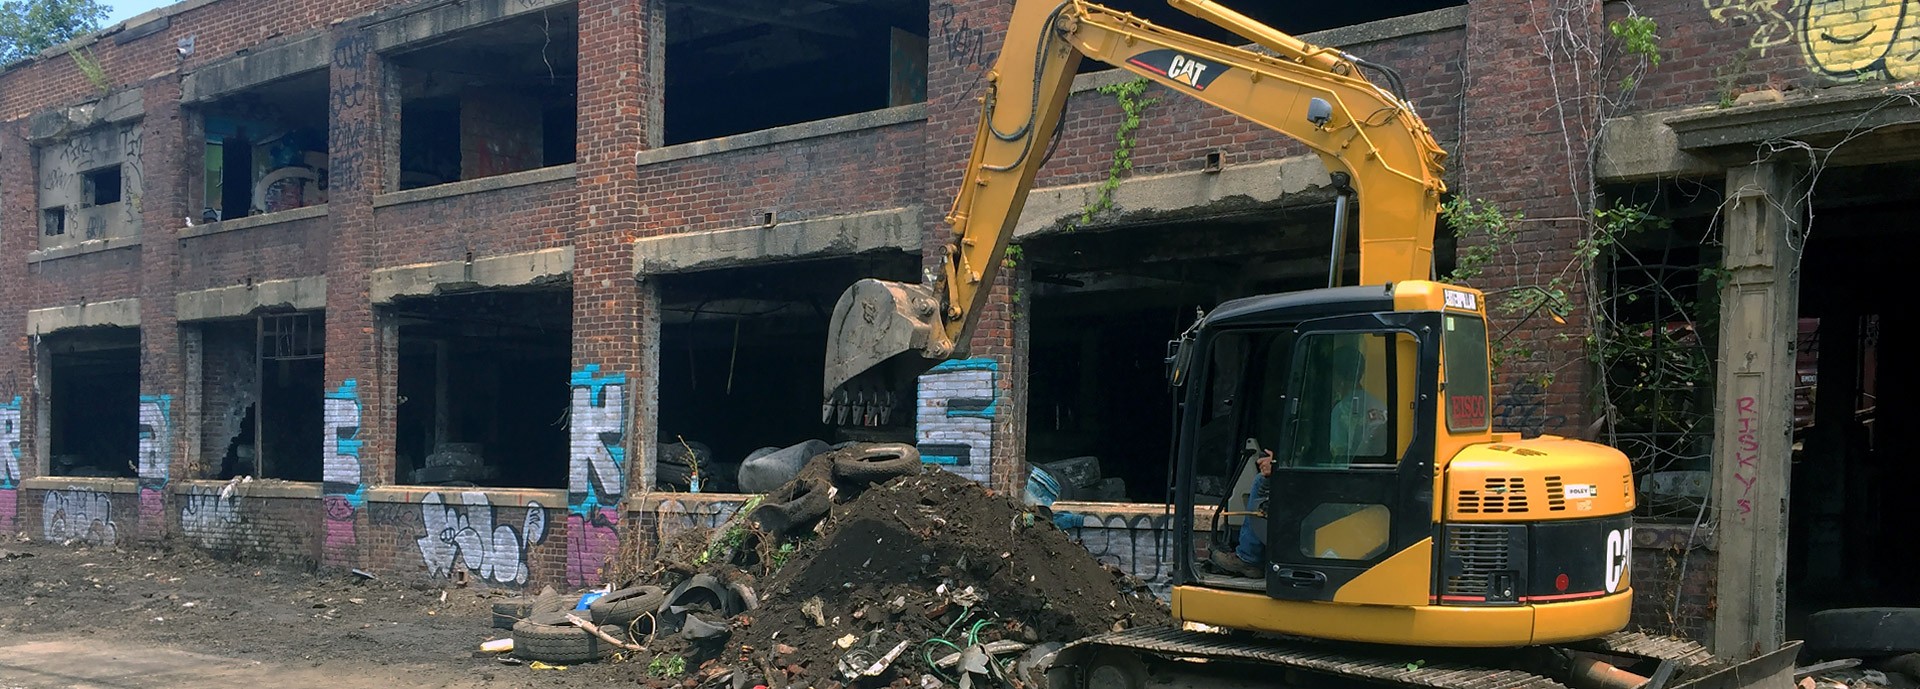 excavator in front of abandoned brick building and pile of dirt